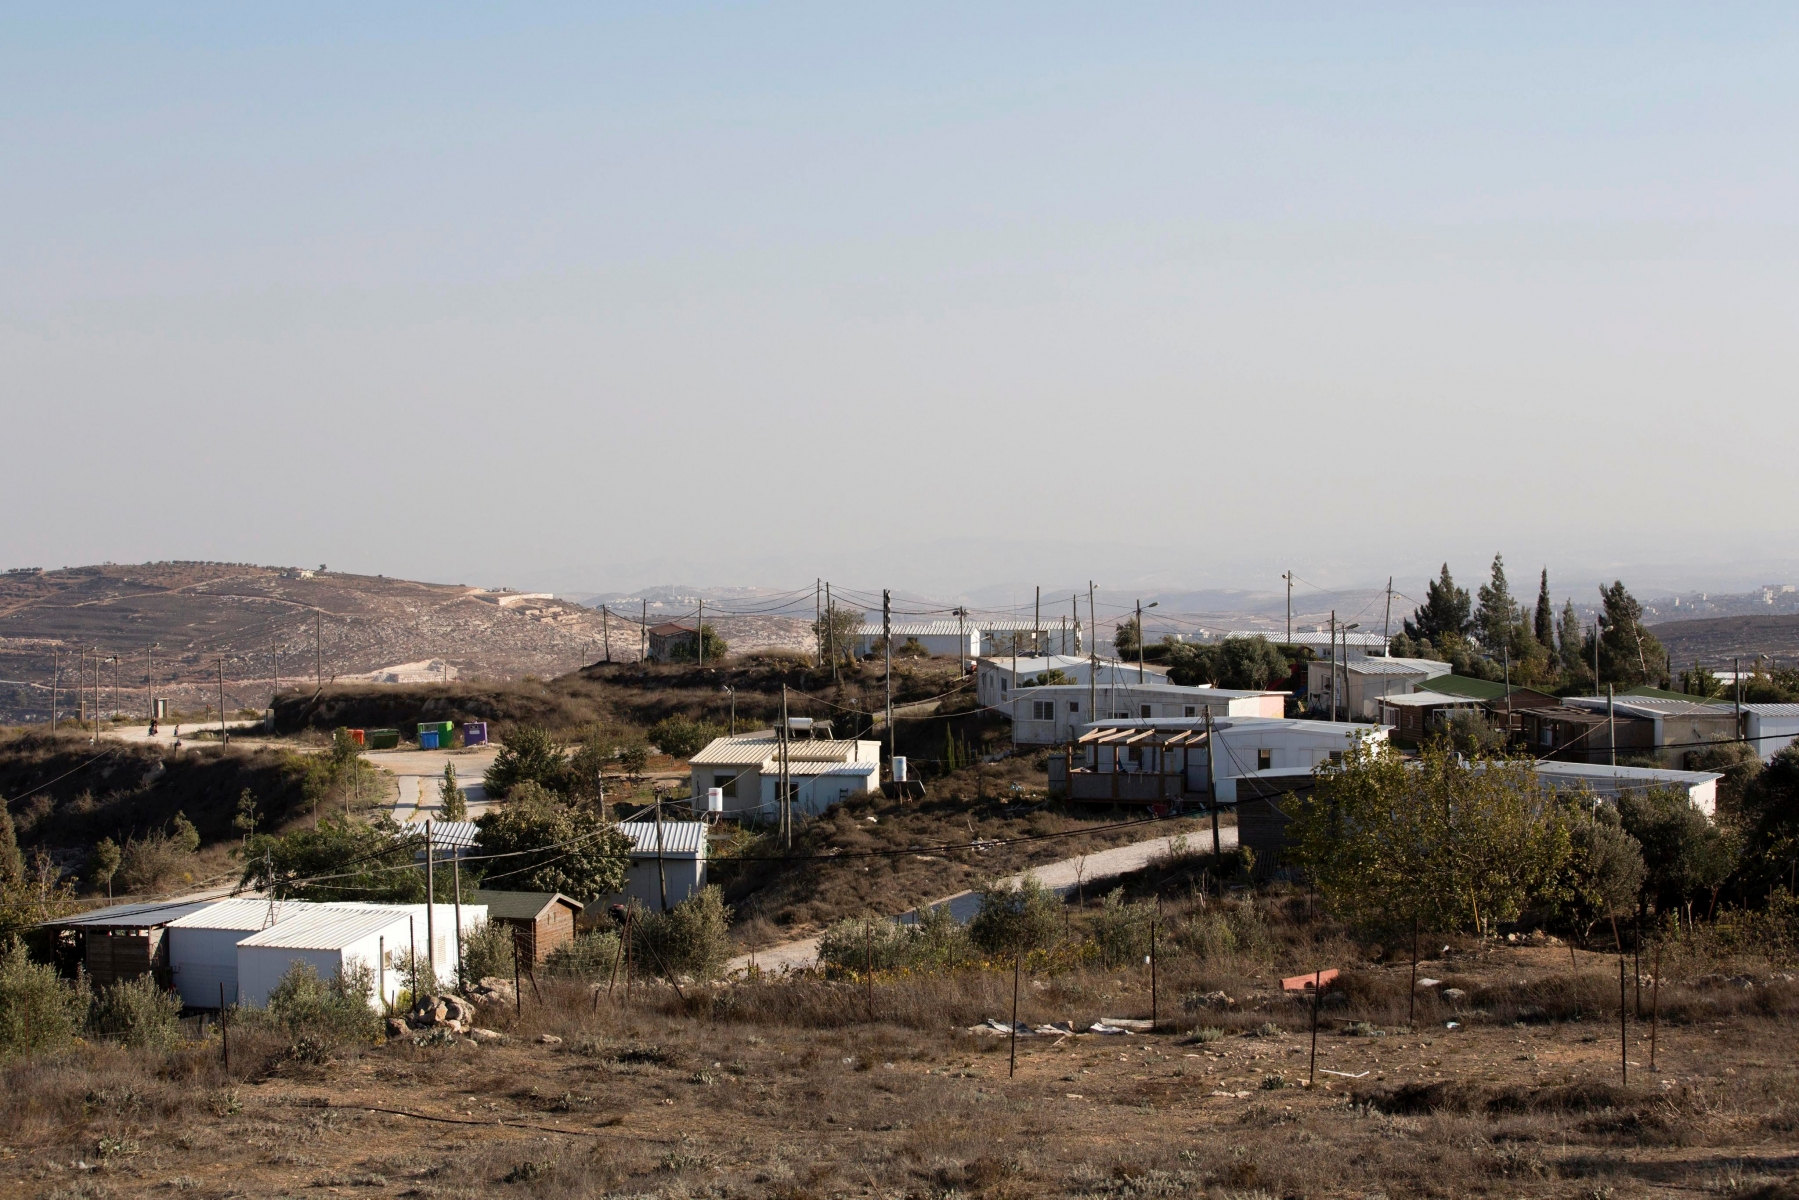 epa05573298 A general view over the Israeli outpost of Amona located in the central West Bank, 06 October 2016. Israel's Supreme Court in December 2014 ruled to evacuate and demolish the outpost by the end of 2016 claiming the outpost was built on private Palestinian land. The Israeli government has offered residents a new alternative to copy Amona to a new settlement to be build  near the Israeli settlement of Shilo, a move that drag strong criticism by US government. Some 50 Jewish settlers families live in Amona.  EPA/ABIR SULTAN MIDEAST ISRAEL CONFLICT SETTELMENTS